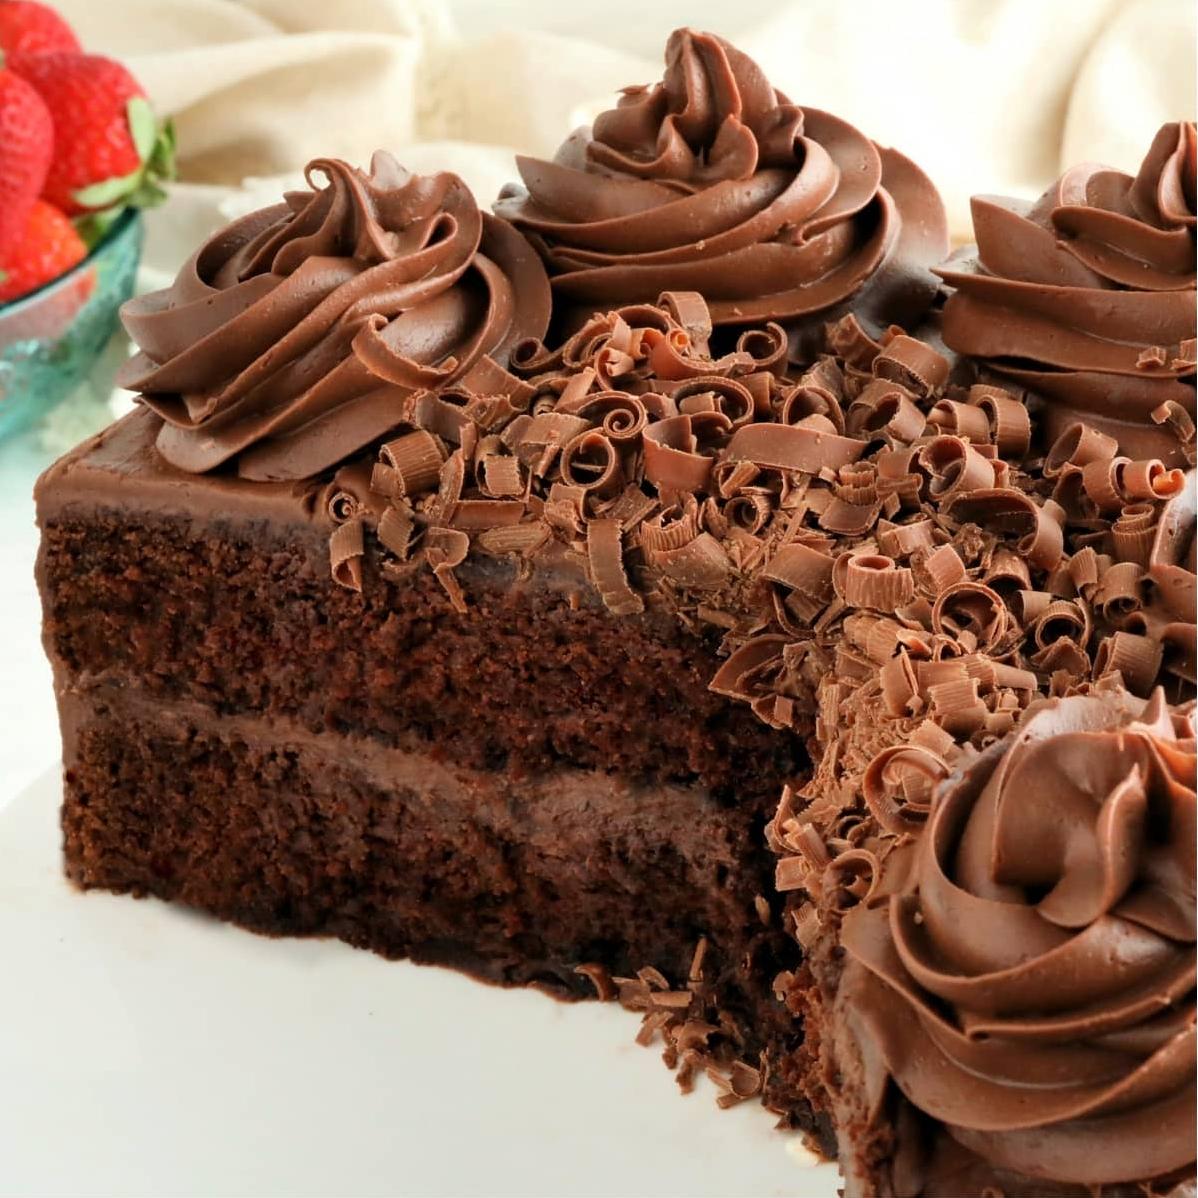  Enjoy a slice of heaven with this fudgy and moist chocolate cake.